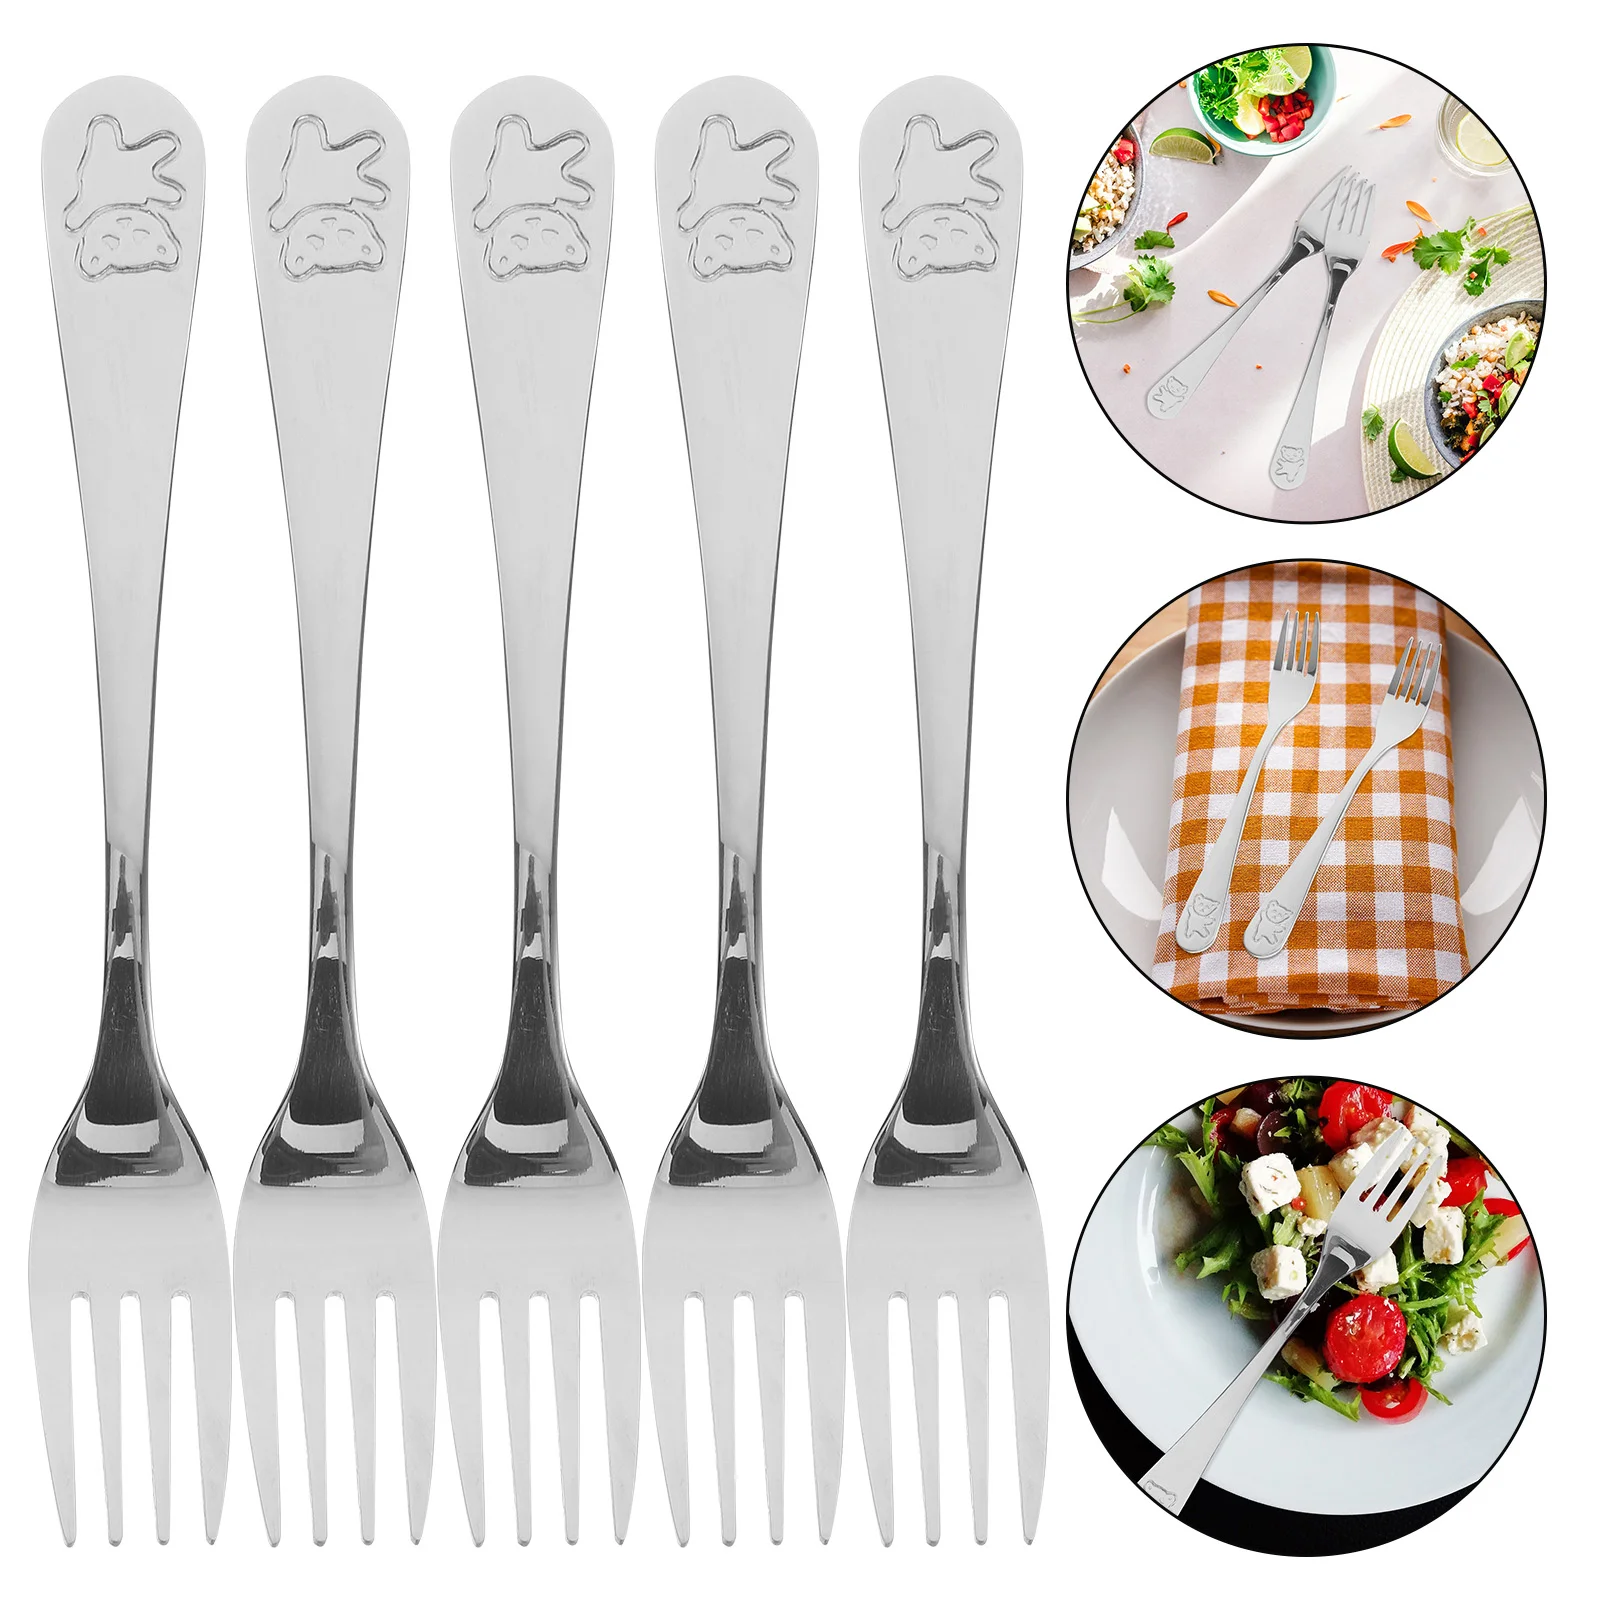 

9 Pcs Stainless Steel Children's Fork Forks Tiny Small Appetizers Fruit Knife and Food Pickle The Jar Bulk Party